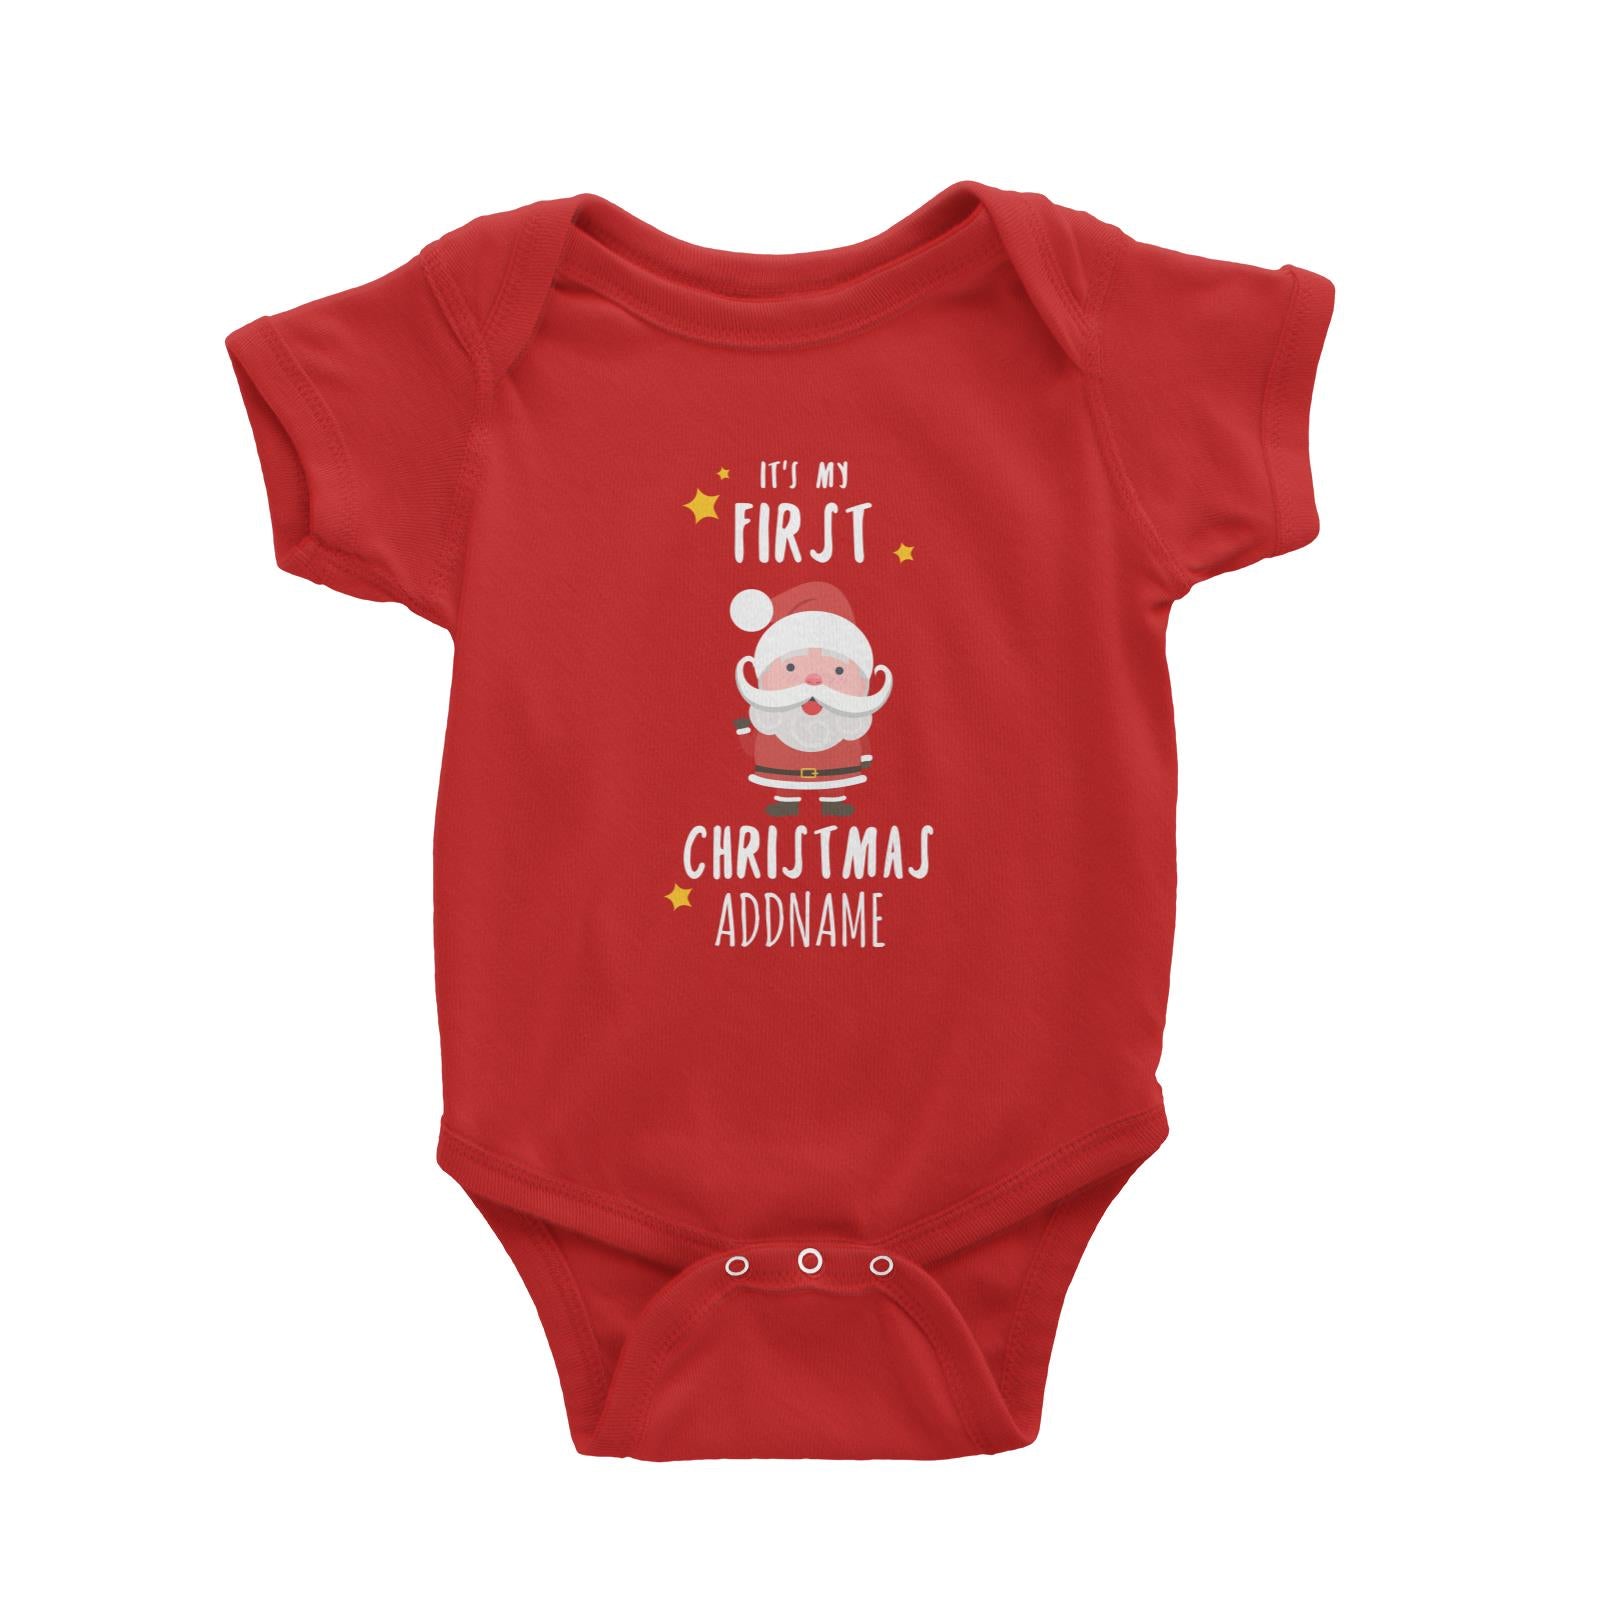 Cute Santa First Christmas Addname Baby Romper  Personalizable Designs